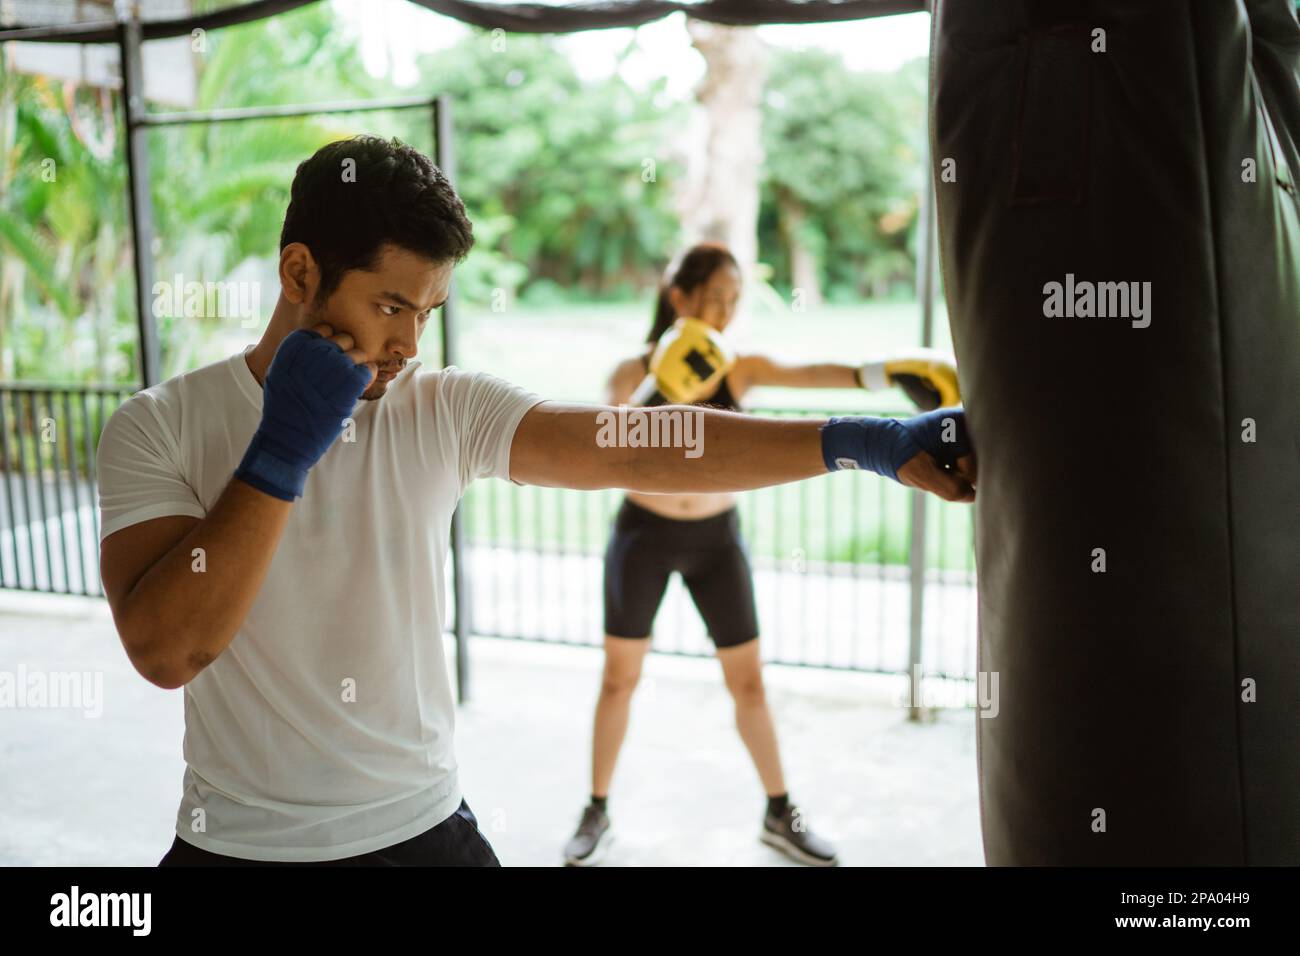 the male and female boxer hitting the sand bag Stock Photo